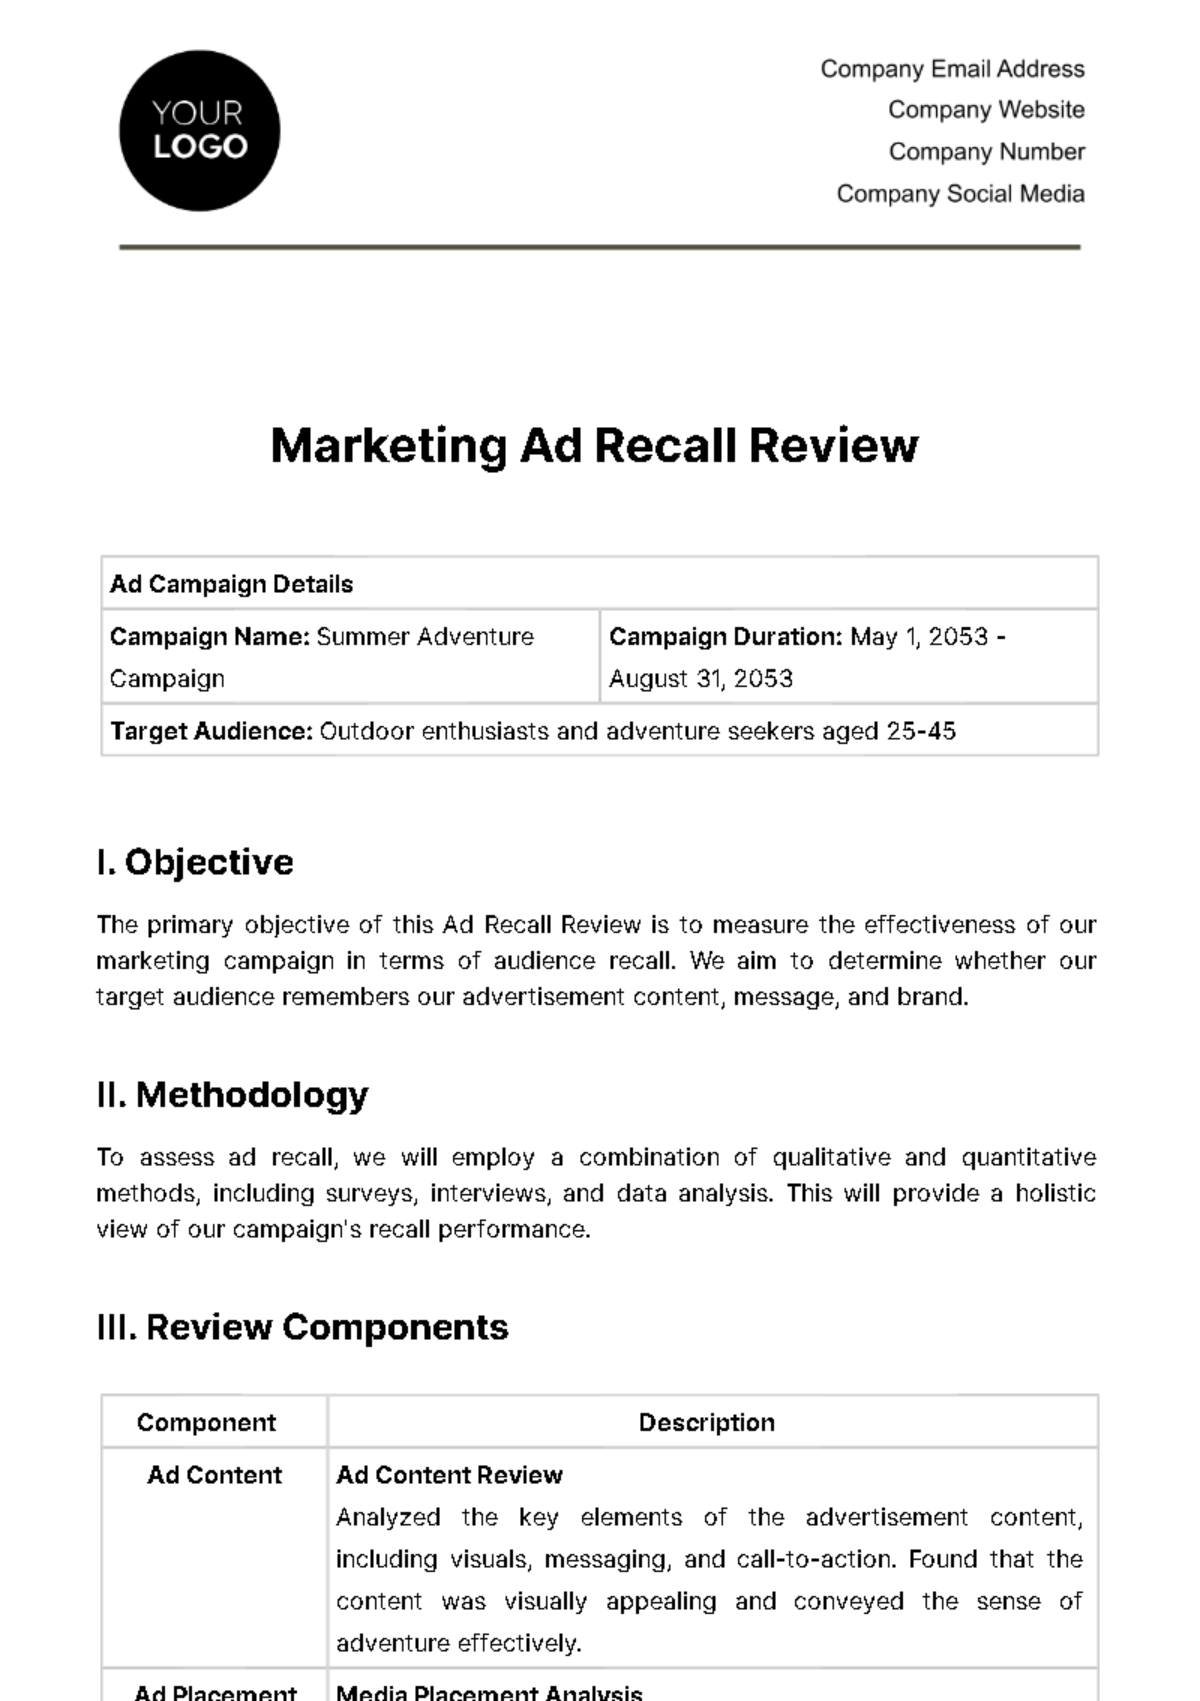 Marketing Ad Recall Review Template